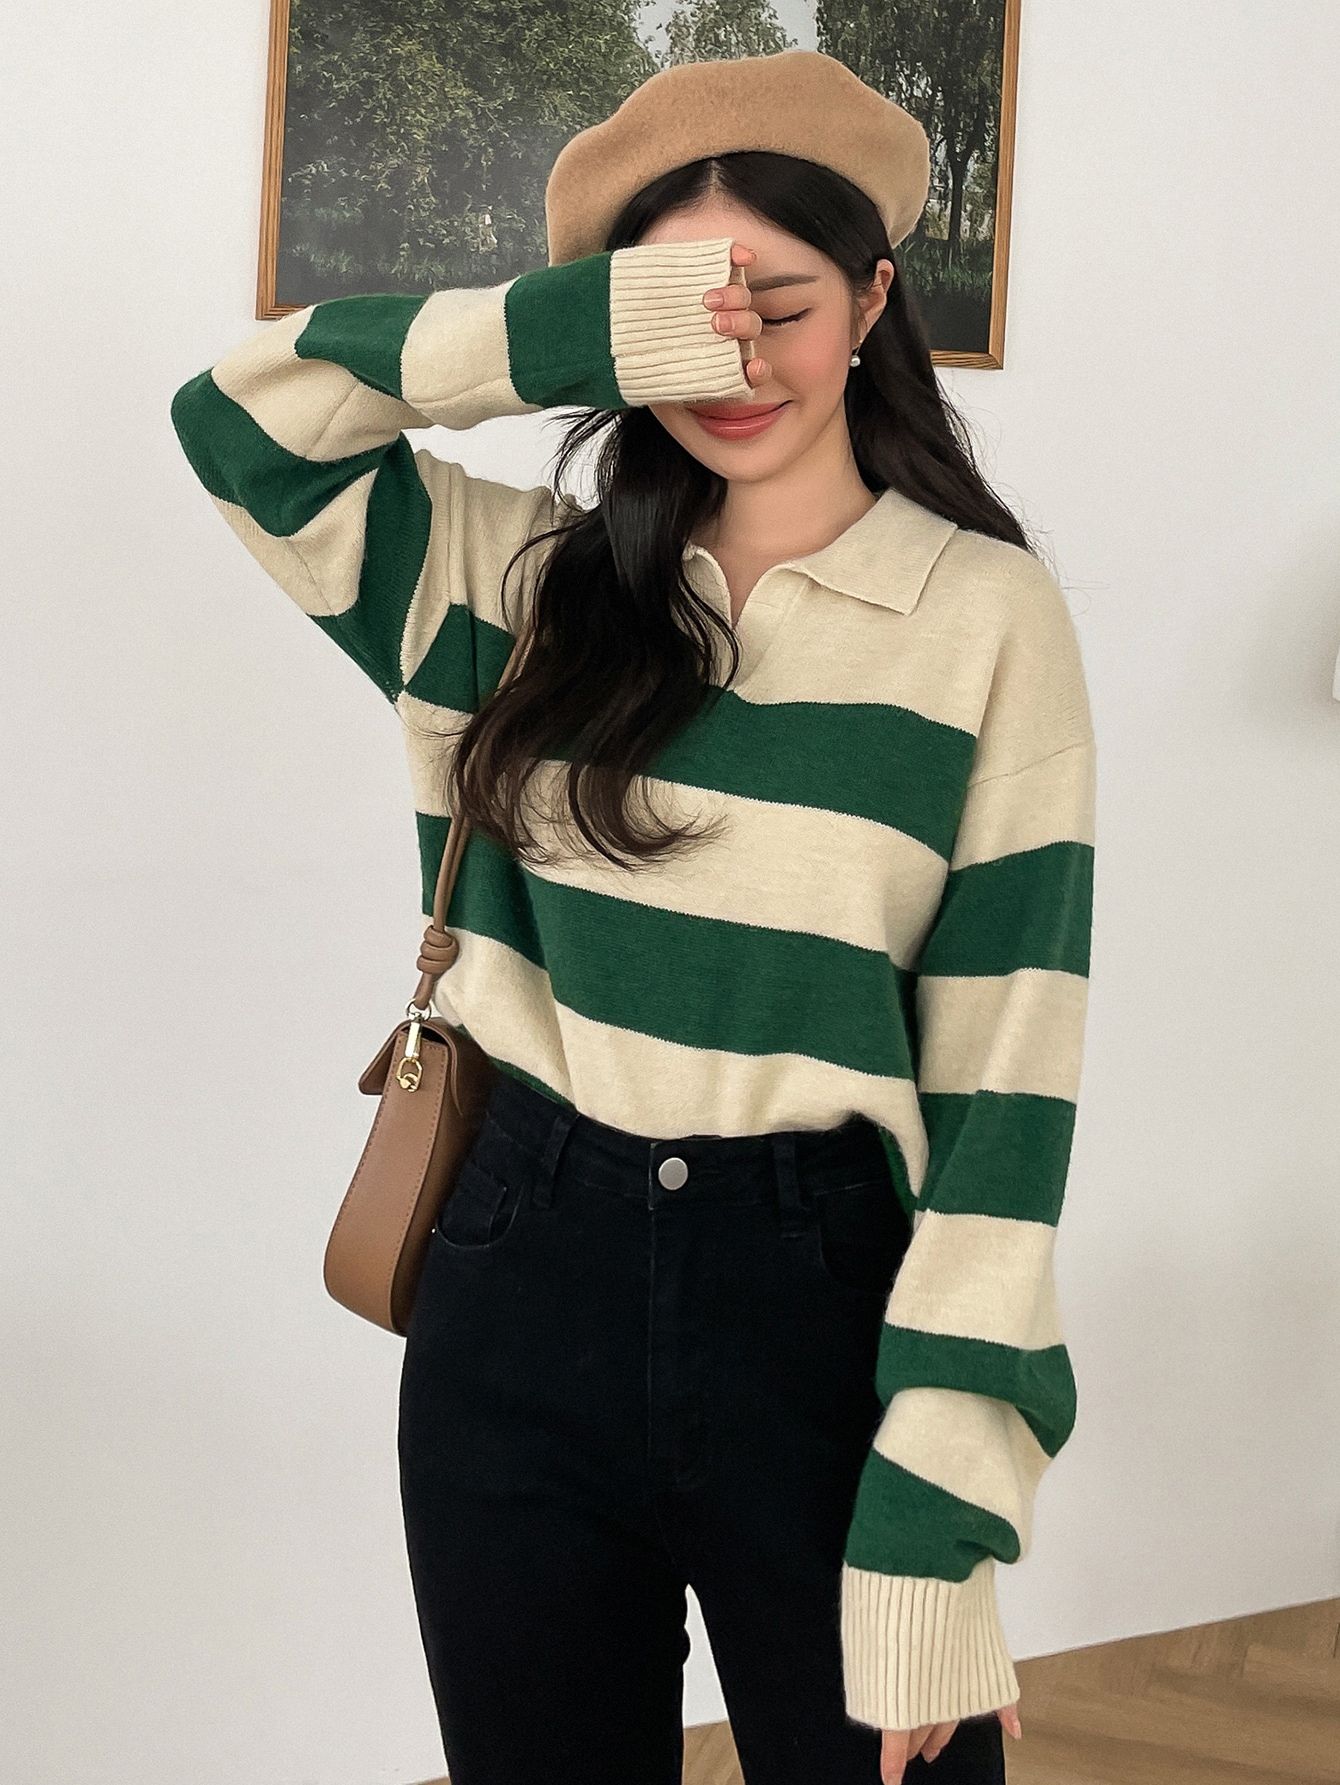 How to Style Striped Polo Shirt: Top 15 Smart Looking Outfit Ideas for Women